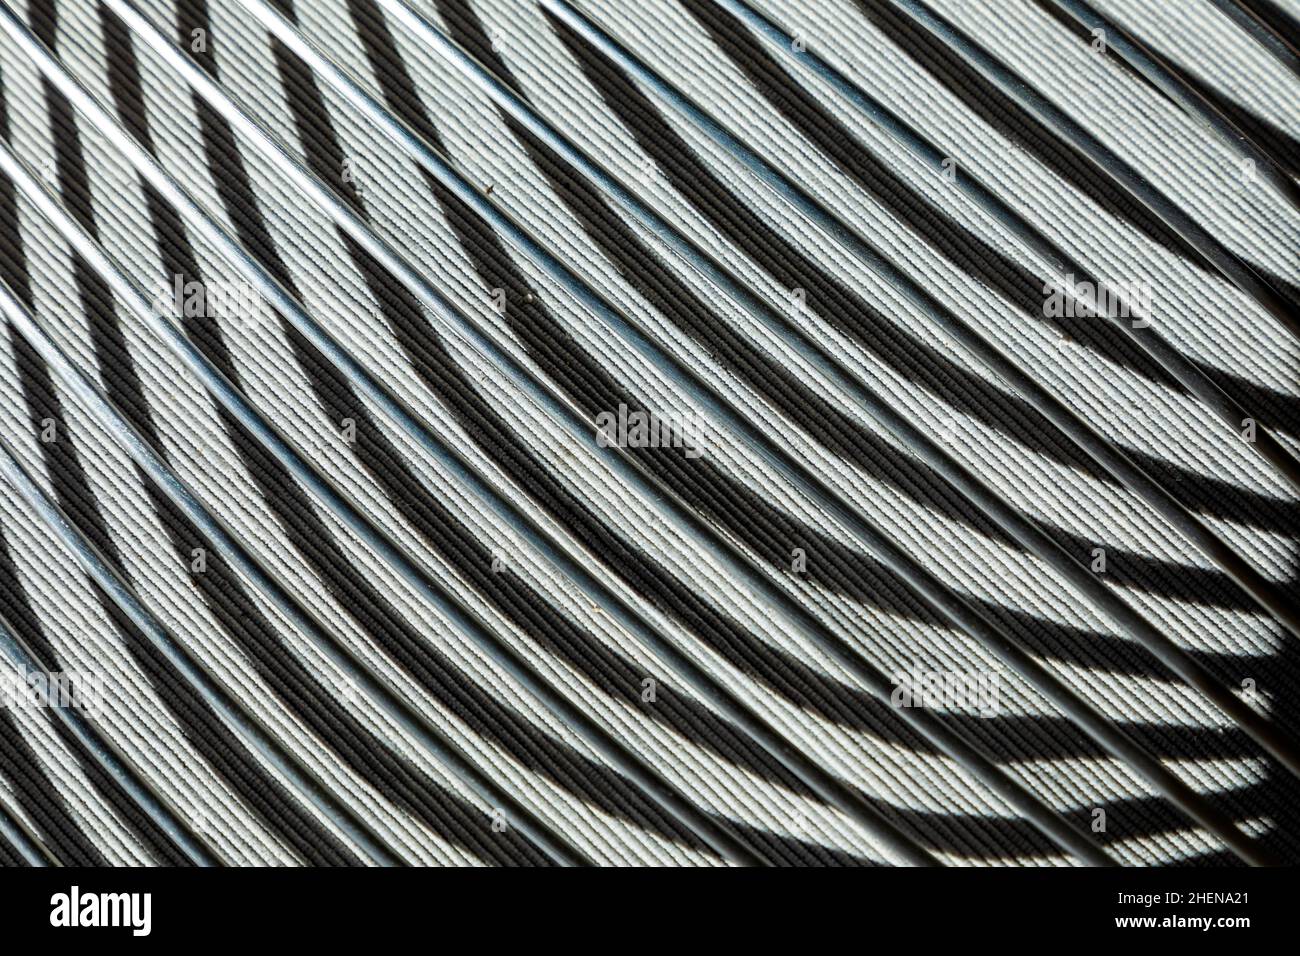 shadow of a silver chair in detail gives a abstract harmonic pattern Stock Photo